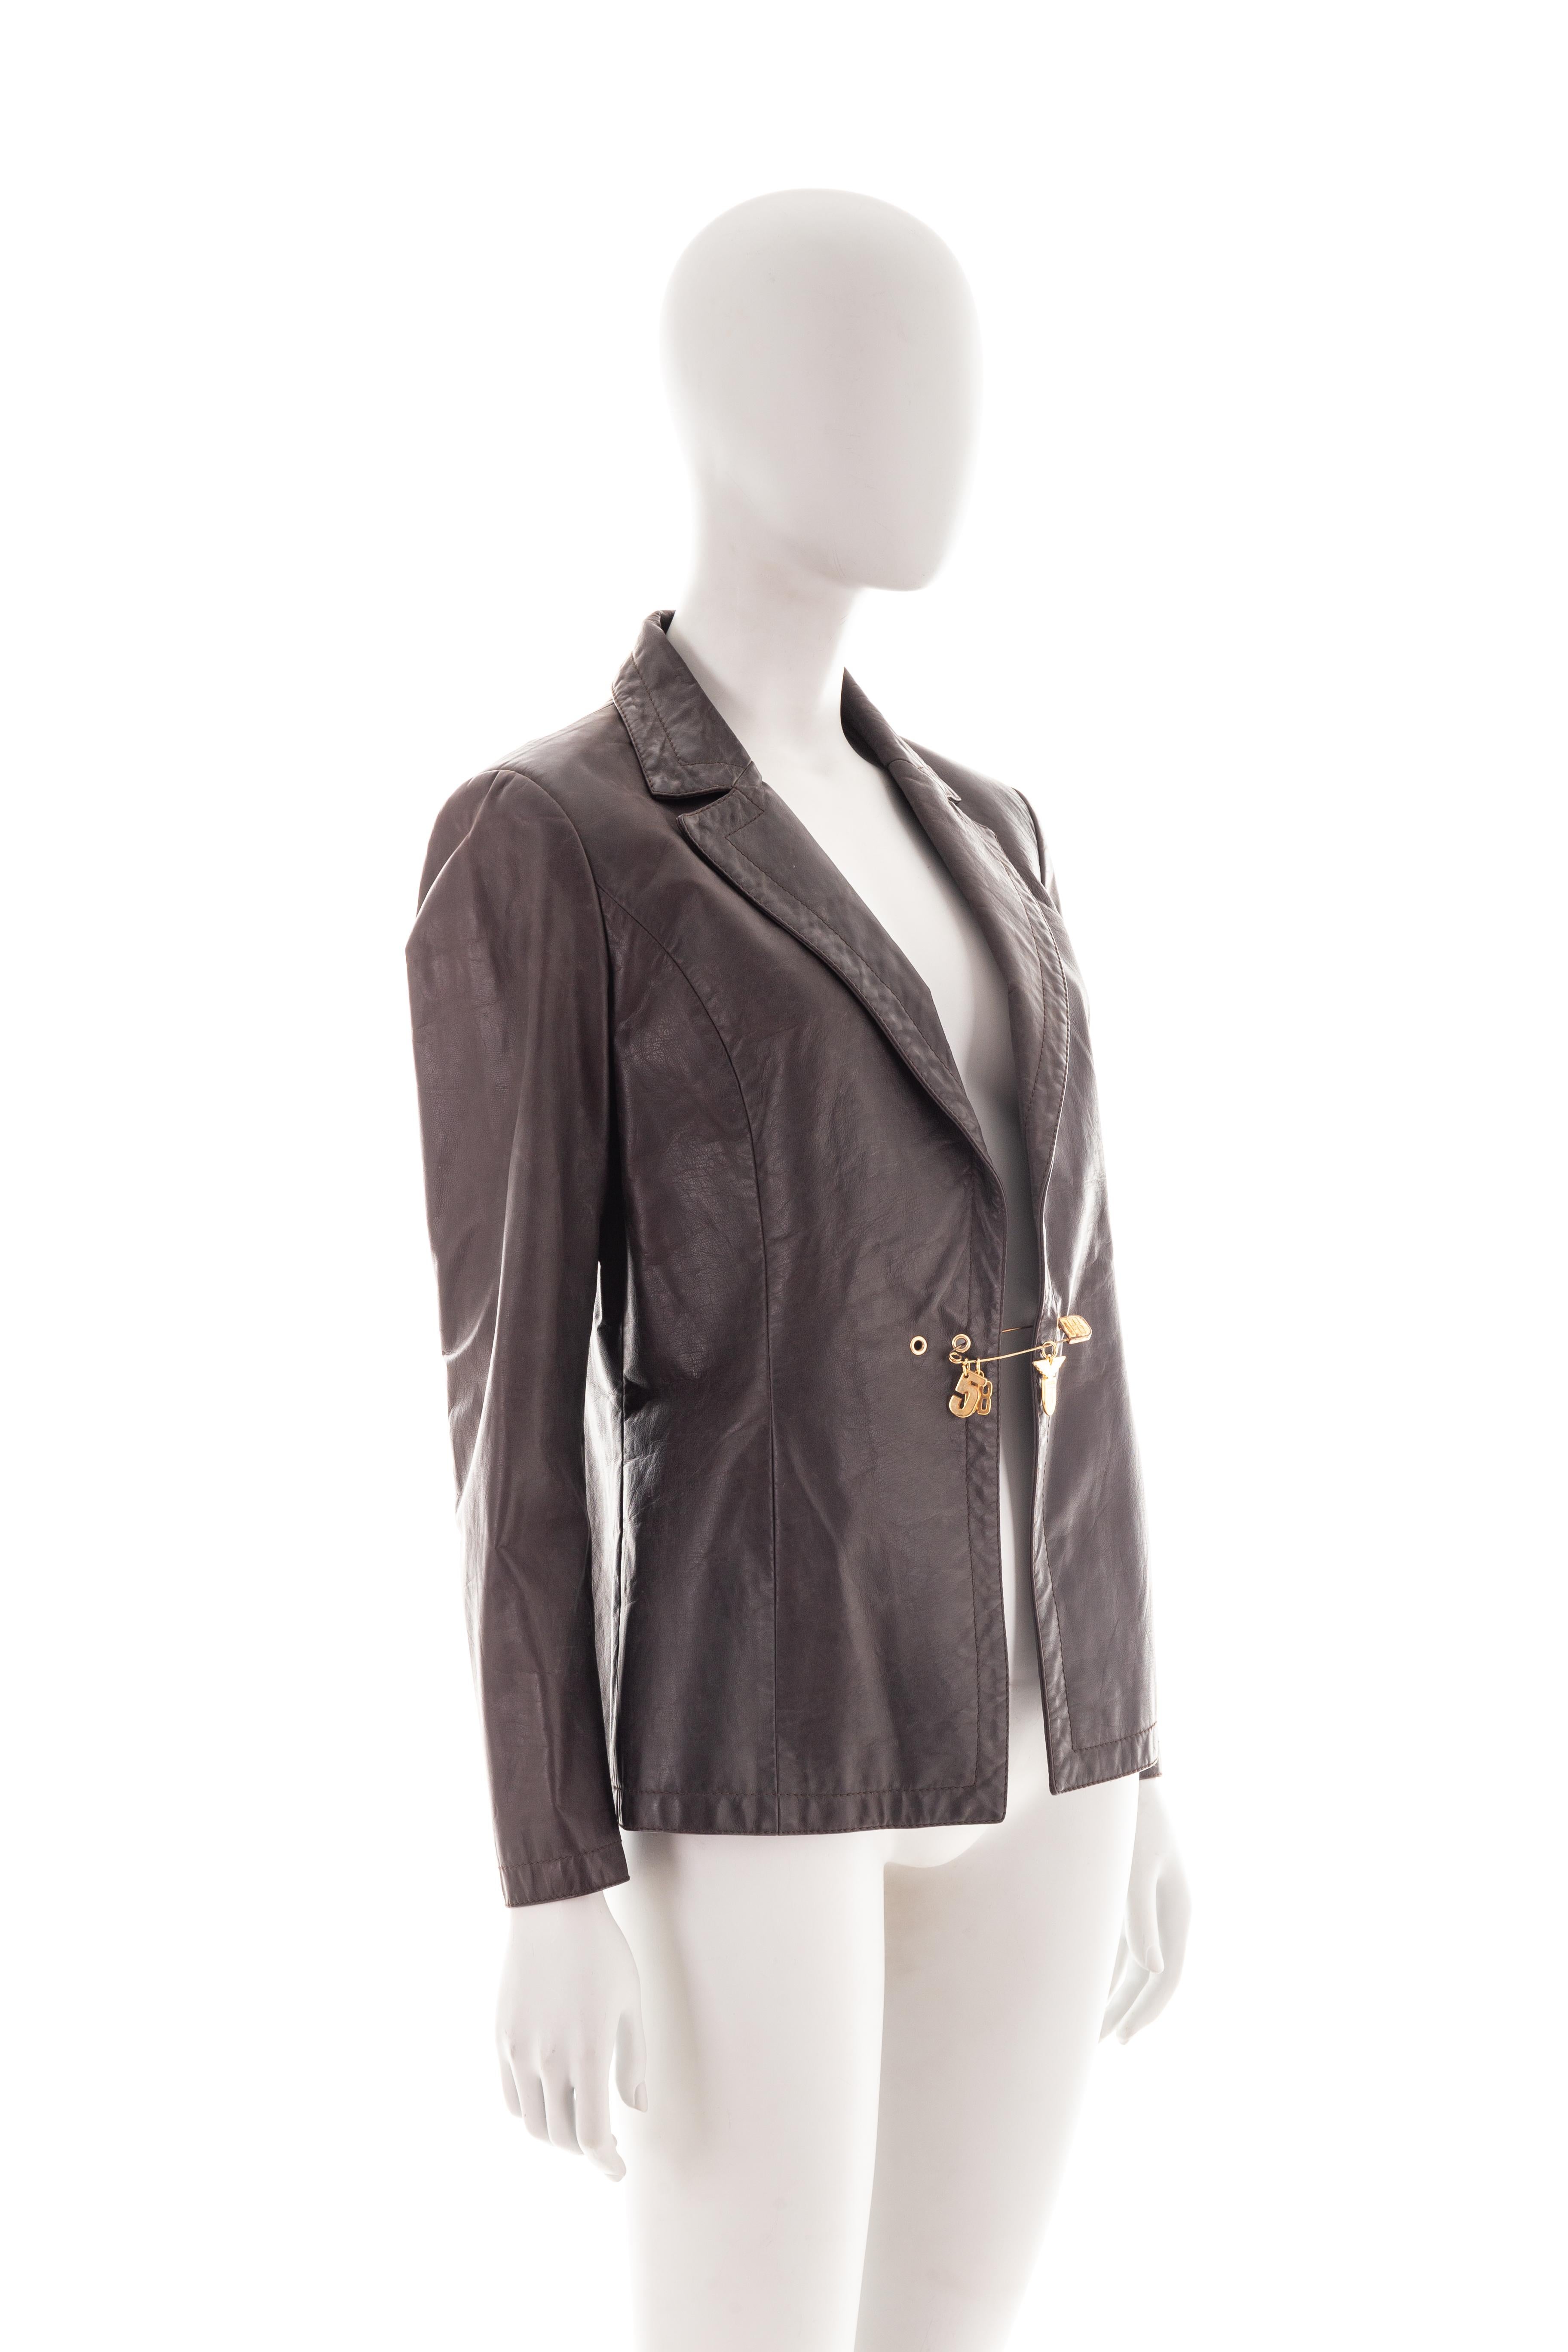 - Mid 2000s
- Sold by Gold Palms Vintage
- Dark brown leather jacket
- Gold safety pin fastening with charms 
- Size: IT 44
